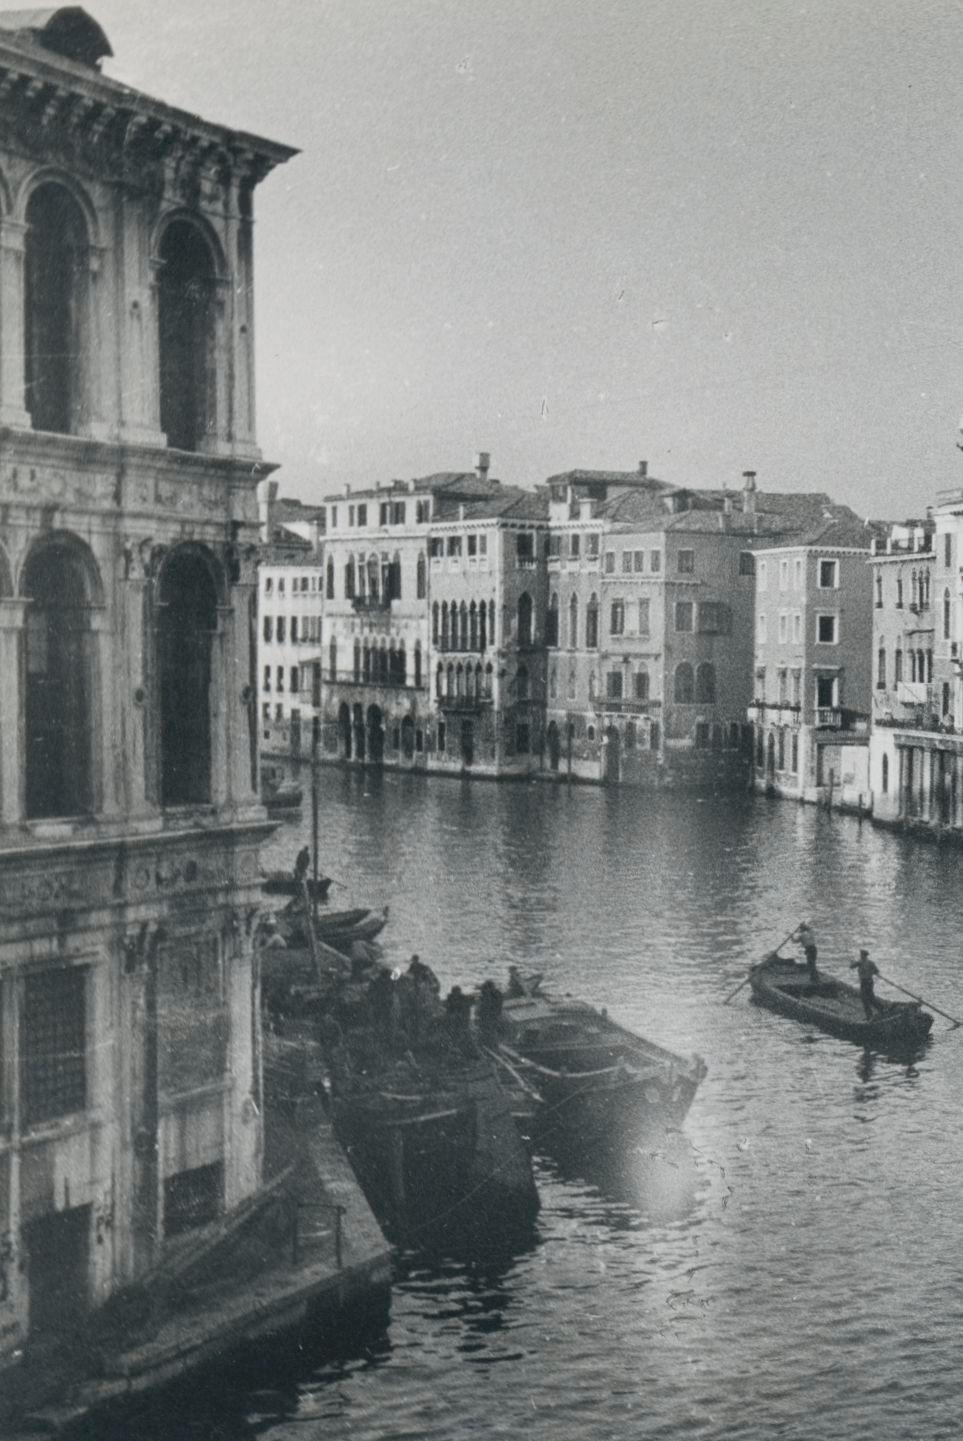 Venice, Venedig, Canale Grande, Italy 1950s, 13 x 17, 7 cm - Photograph by Erich Andres